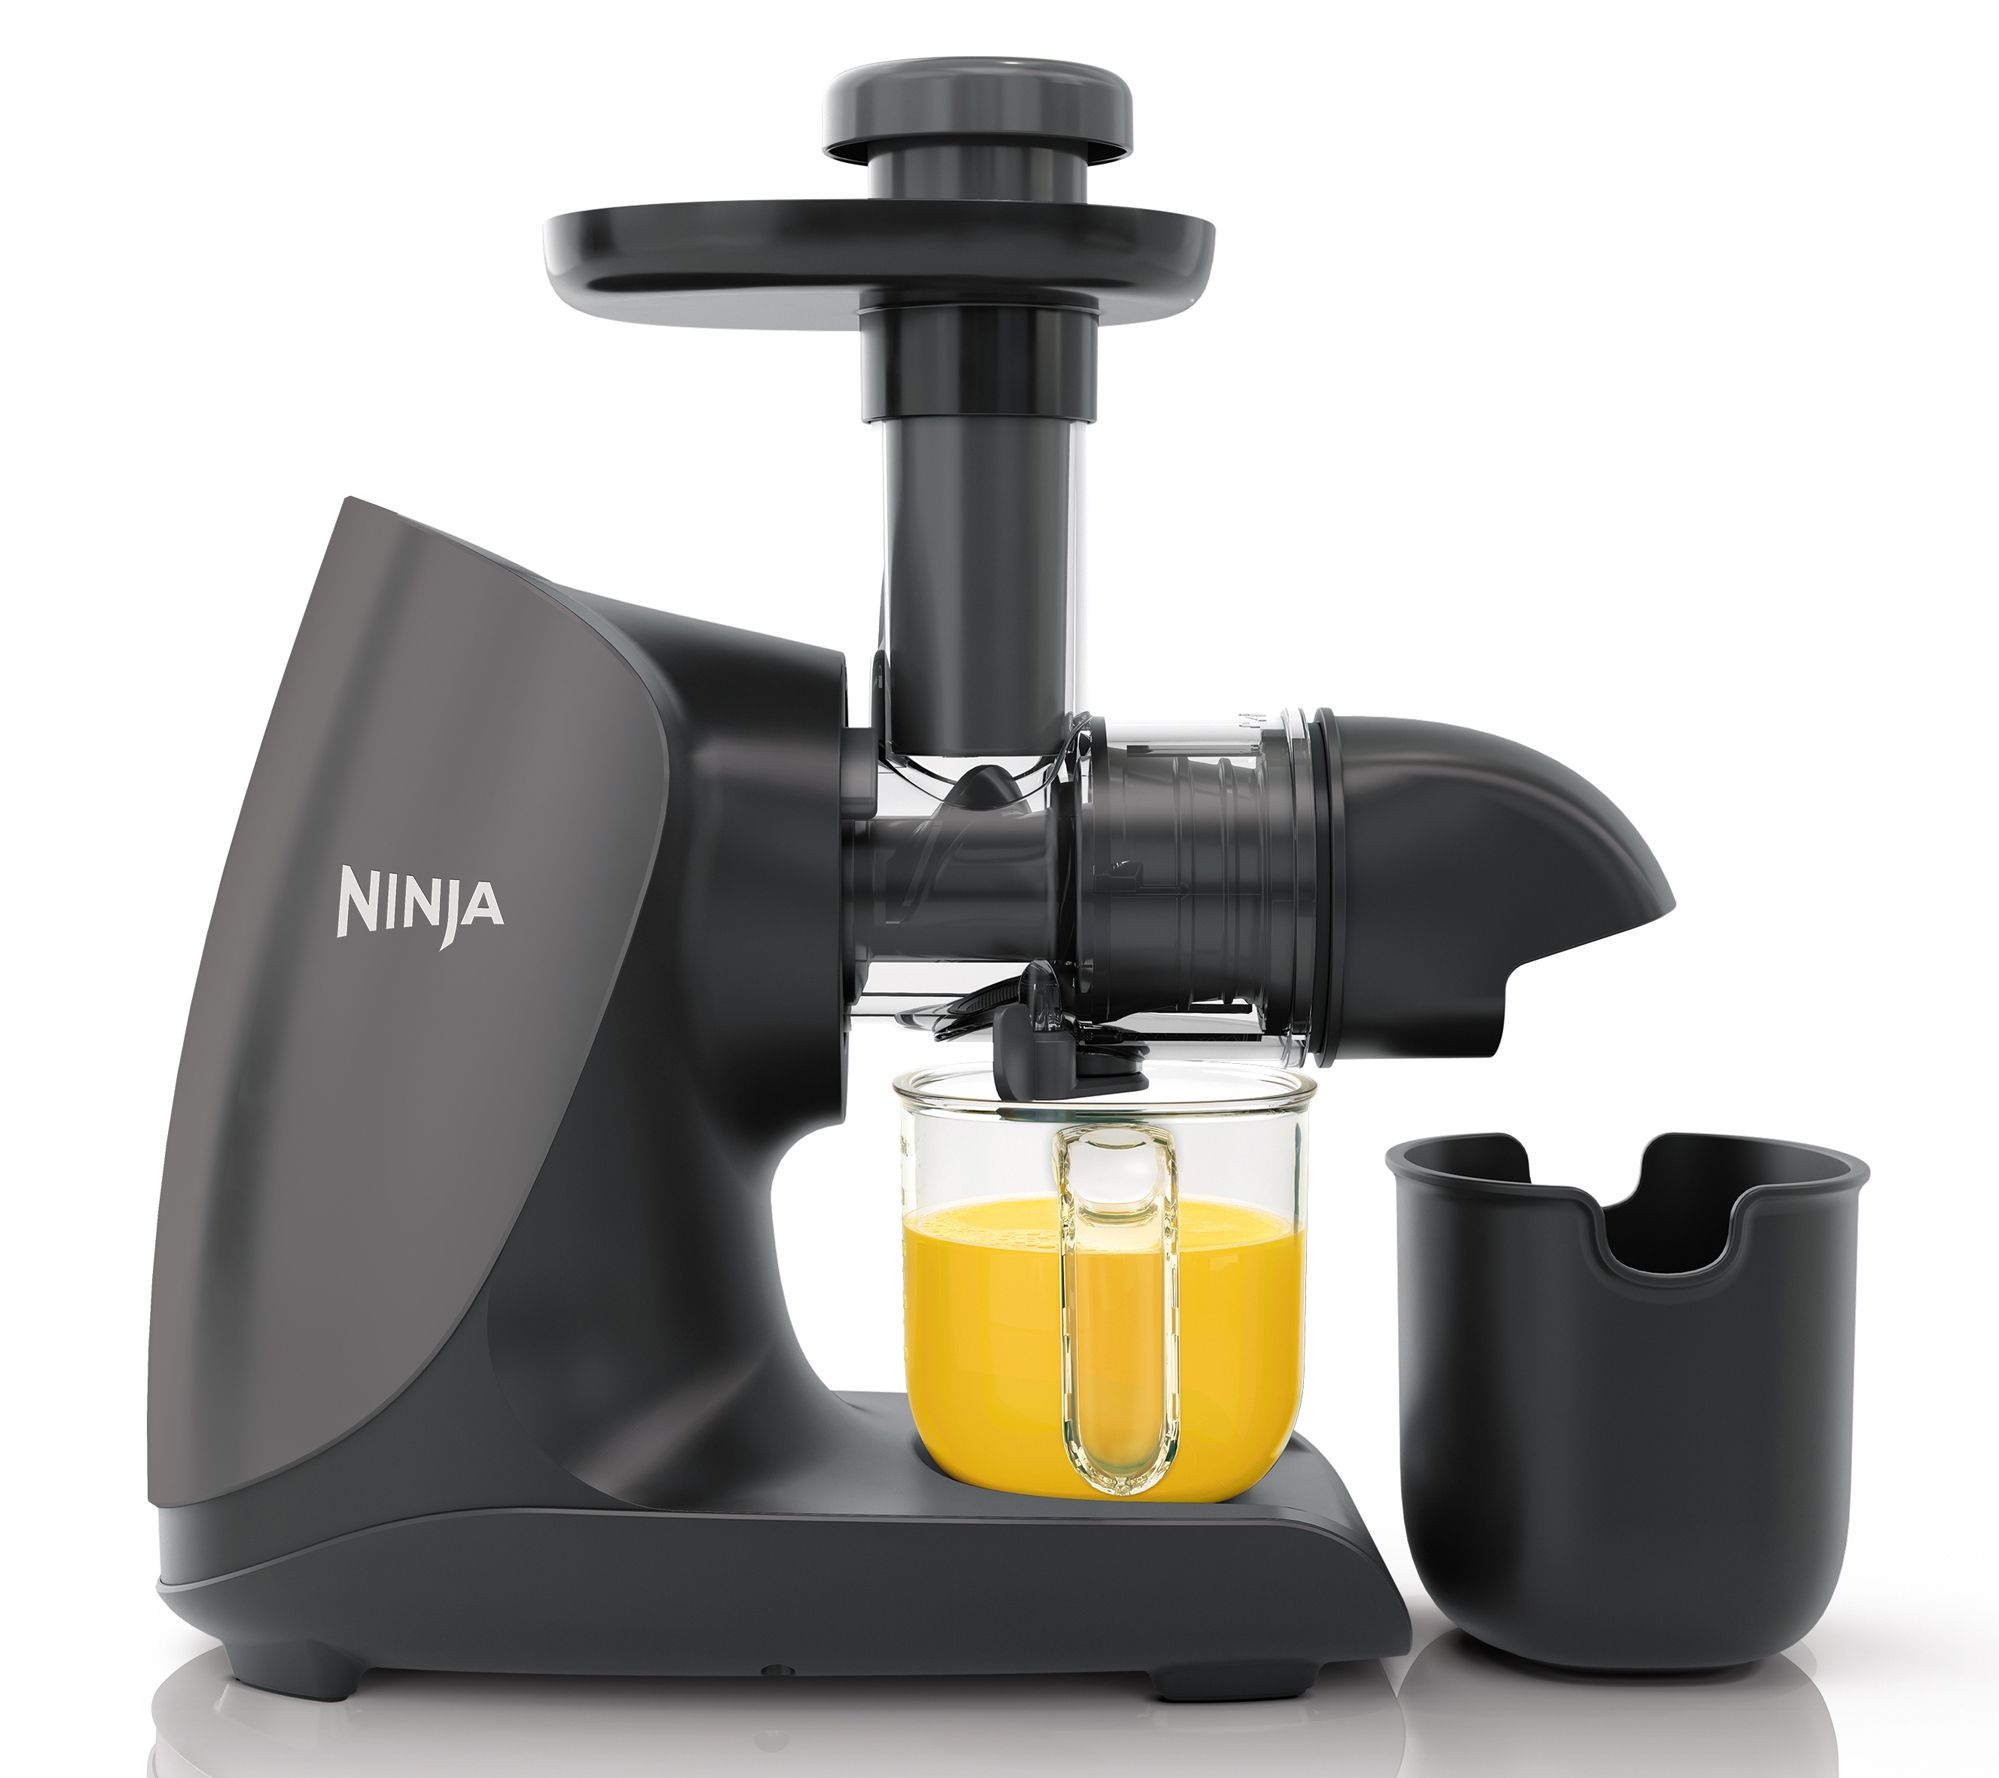 Let's Juice and Play - PURE Juicer blog